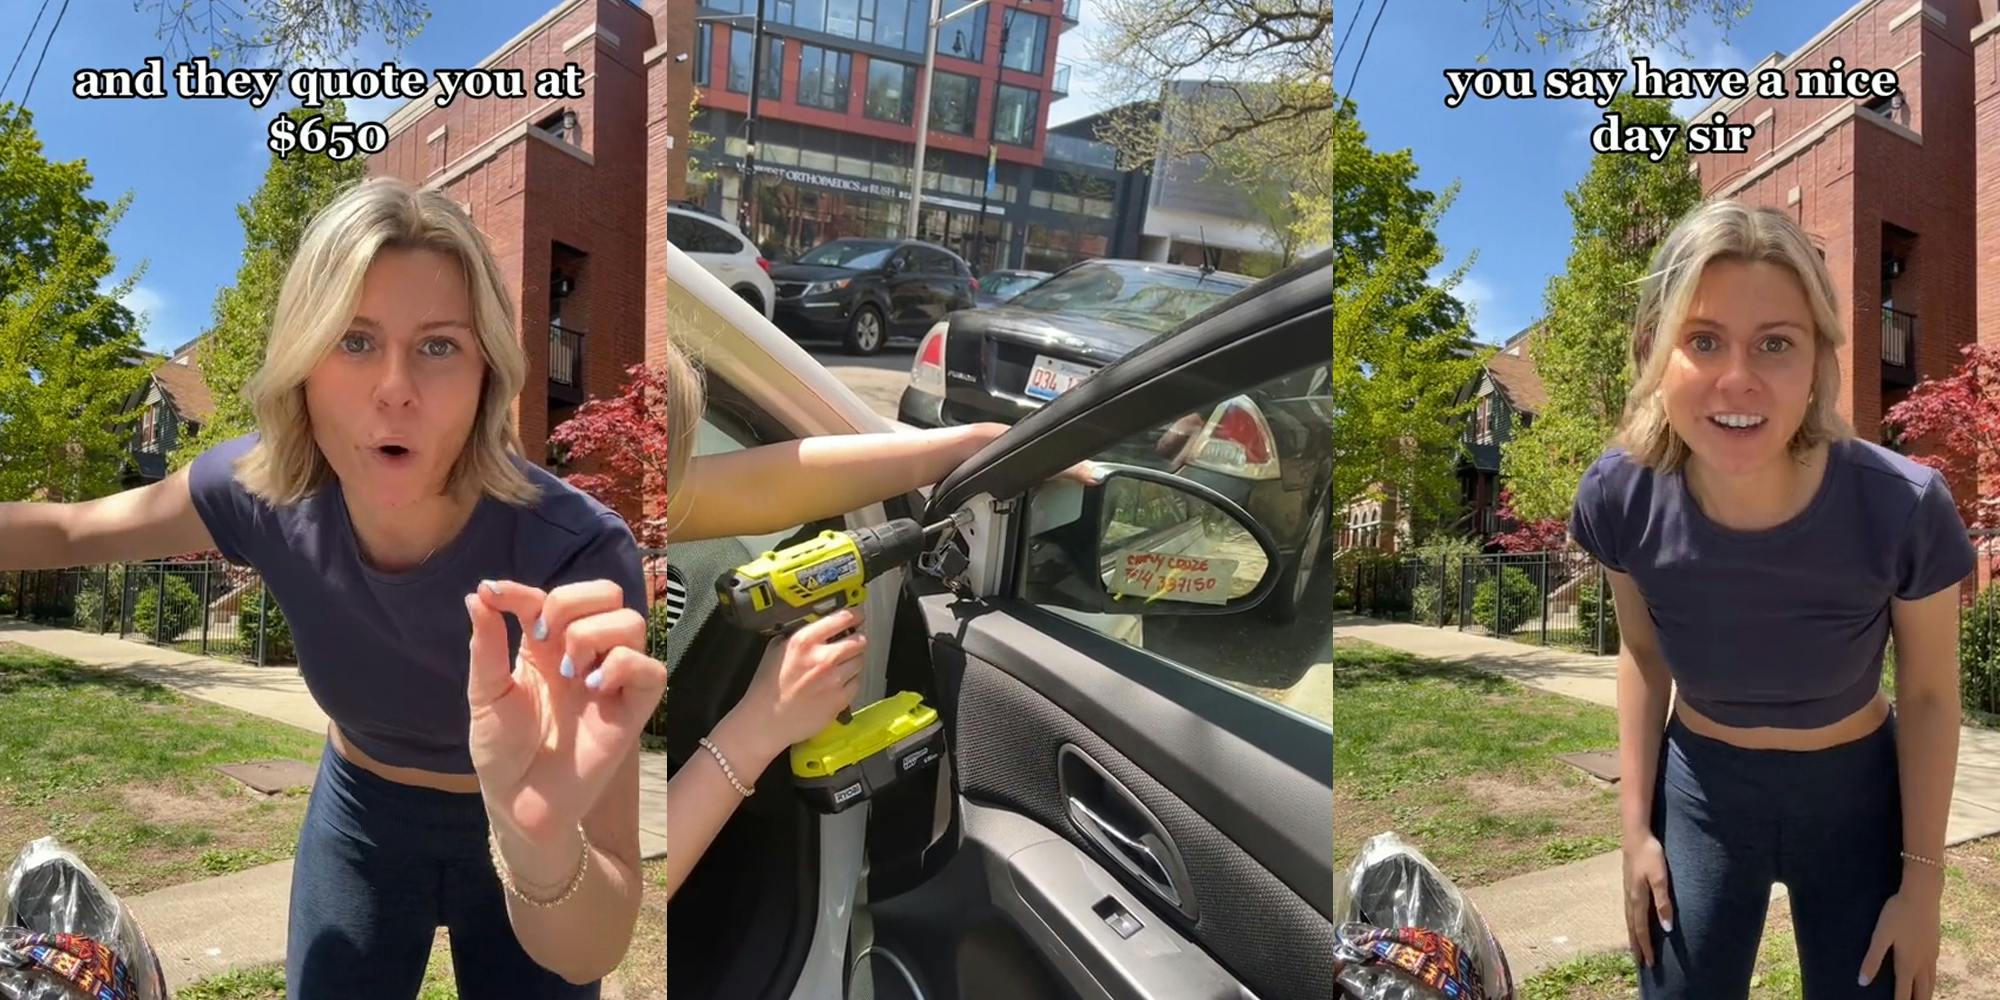 person speaking outside with caption "and they quote you at $650" (l) person replacing car mirror (c) person speaking outside with caption "you say have a nice day sir" (r)